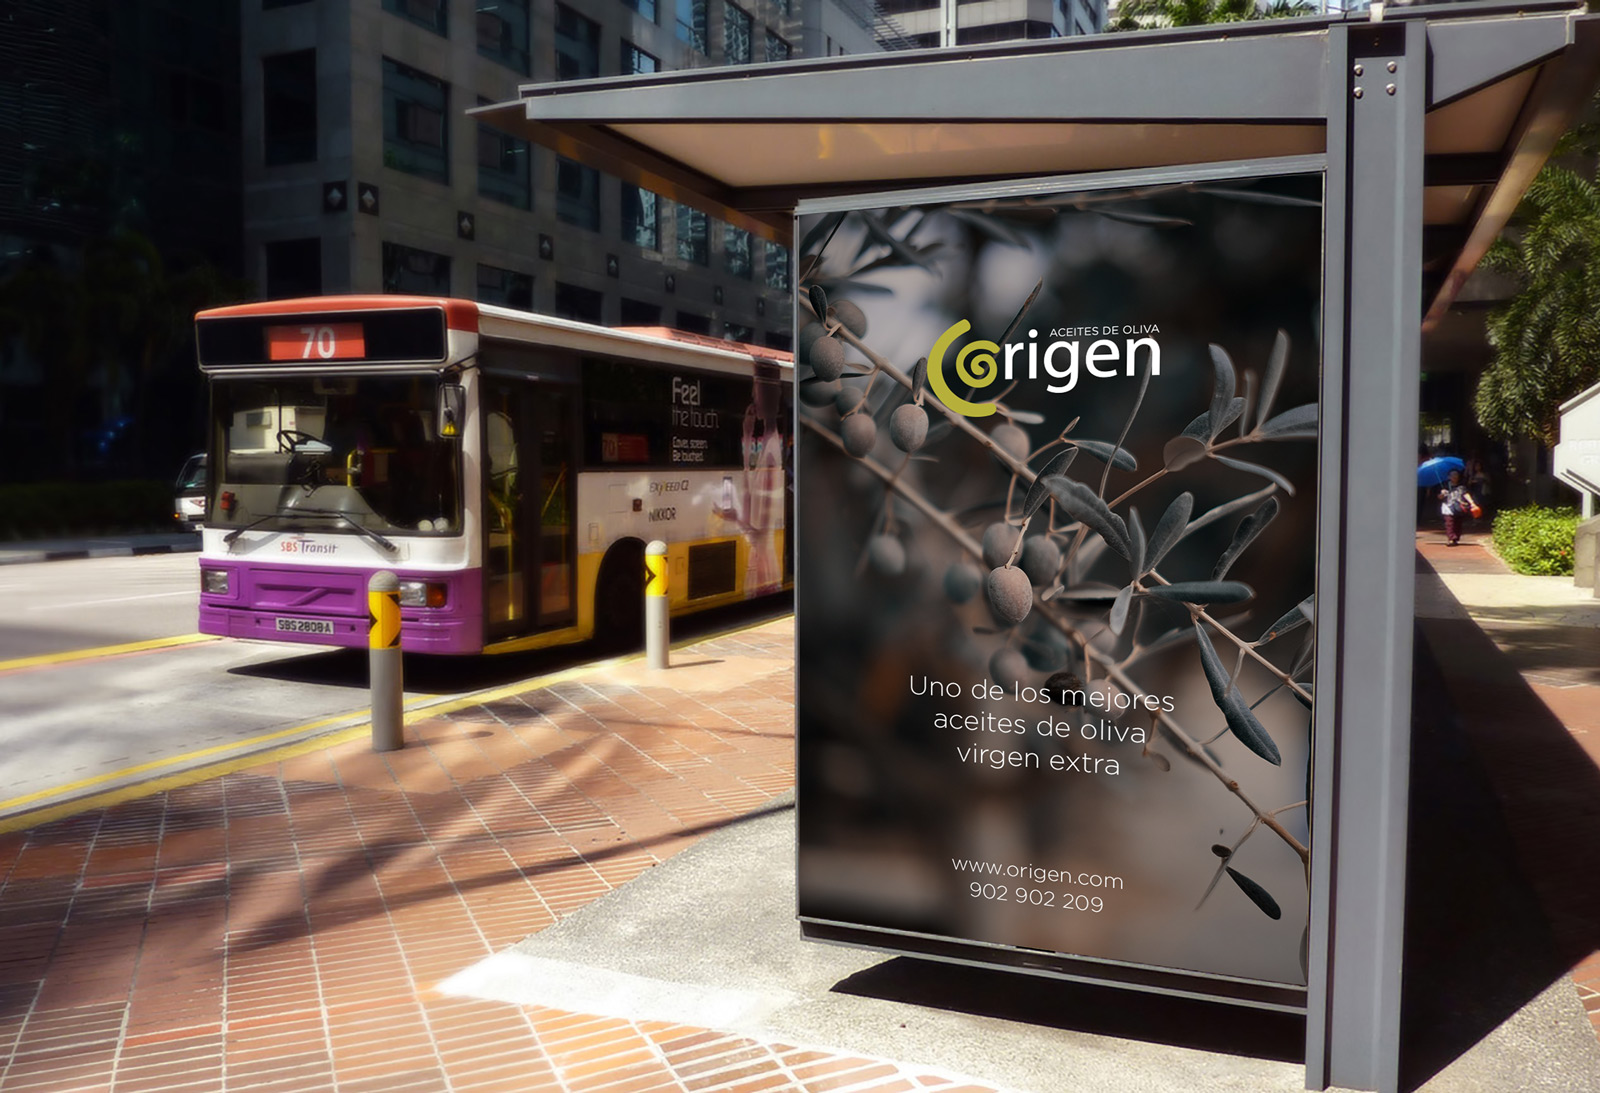 Graphic and creative design of logo and branding for a brand of extra virgin olive oil for the brand ORIGEN PREMIUM